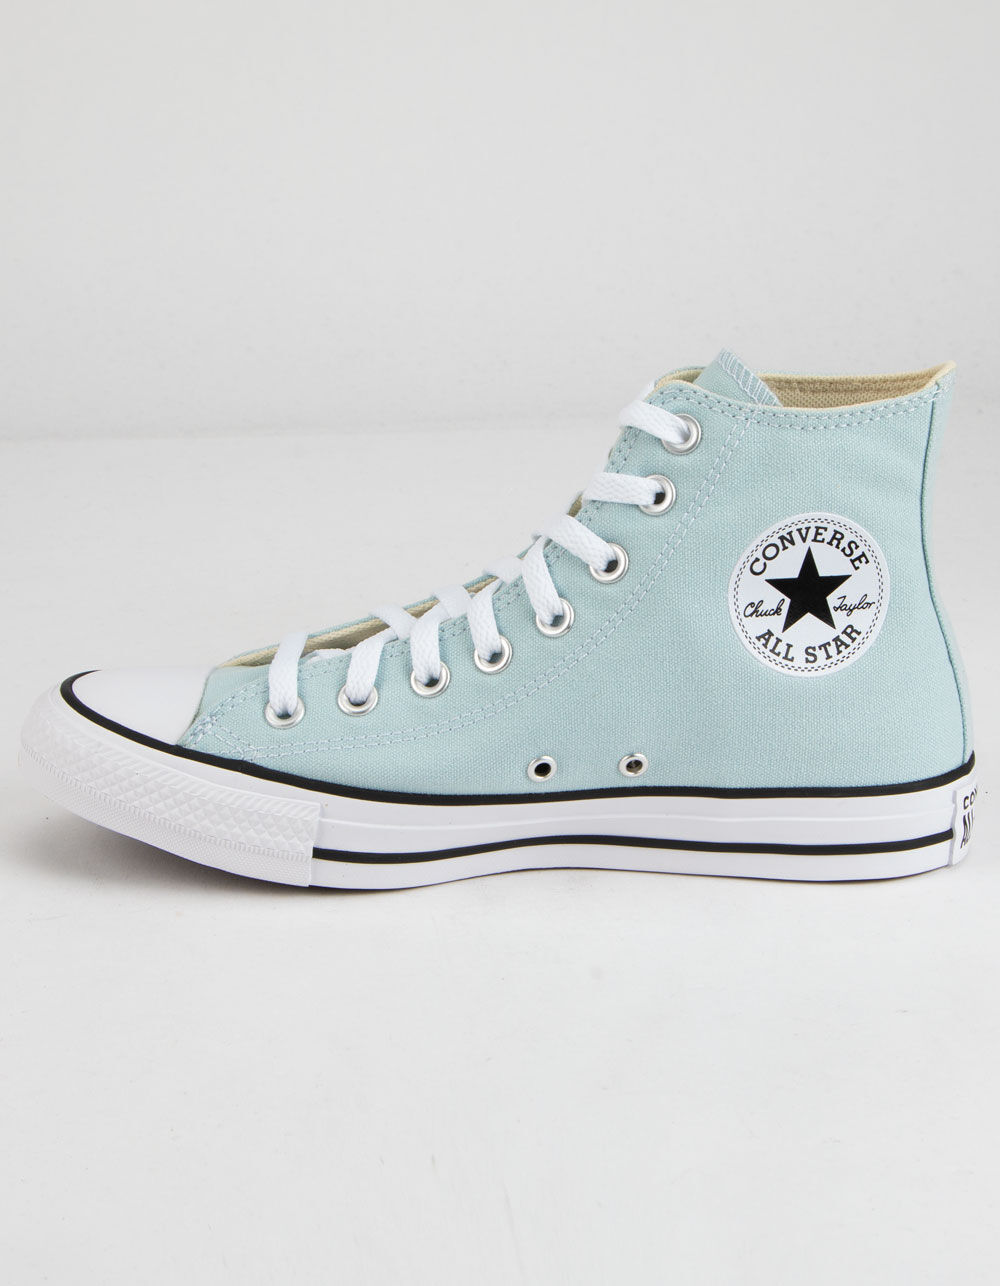 Troende Spytte ud Silicon CONVERSE Chuck Taylor All Star Seasonal Color Light Blue Womens High Top  Shoes - LIGHT BLUE | Tillys